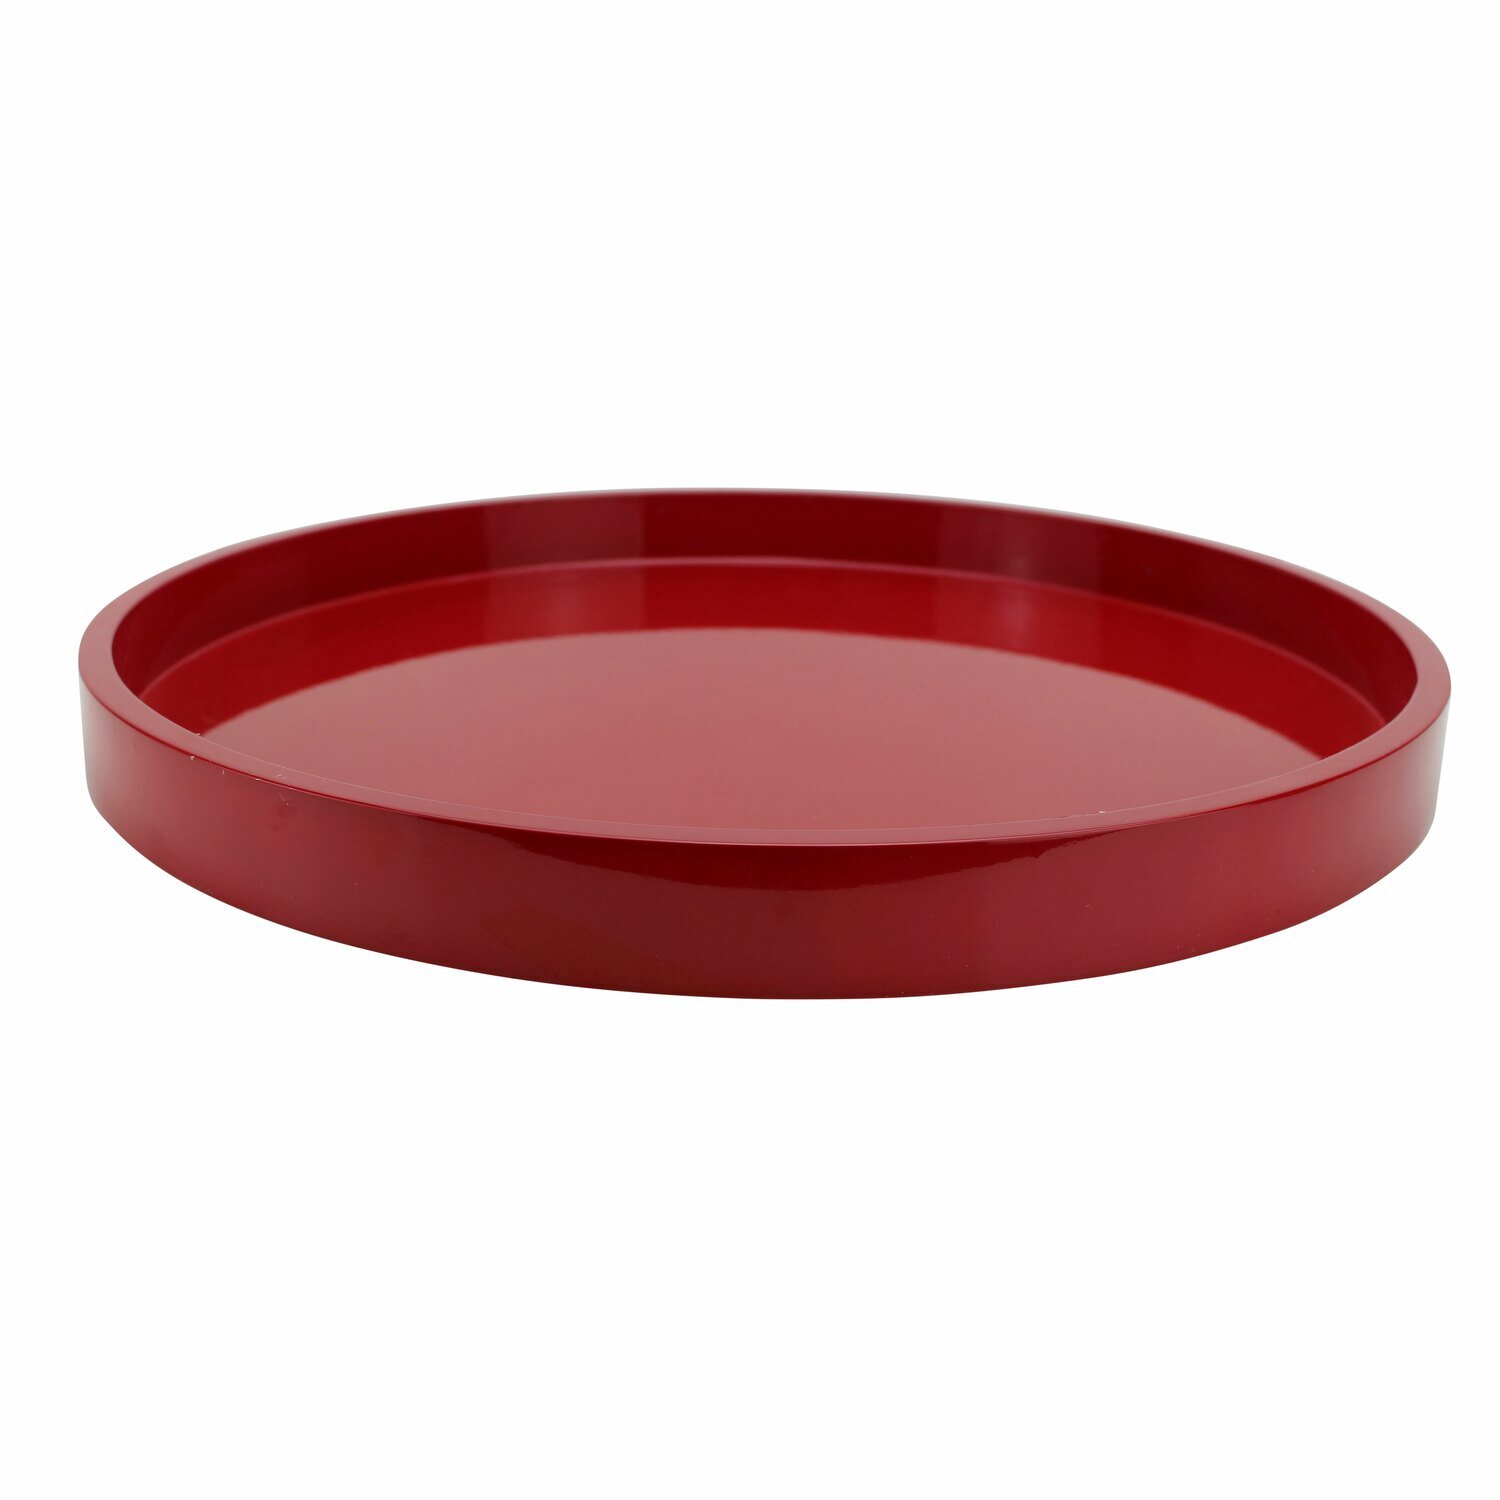 Addison Ross 16 x 16 Inch Round Tray Burgundy Lacquer TR8001